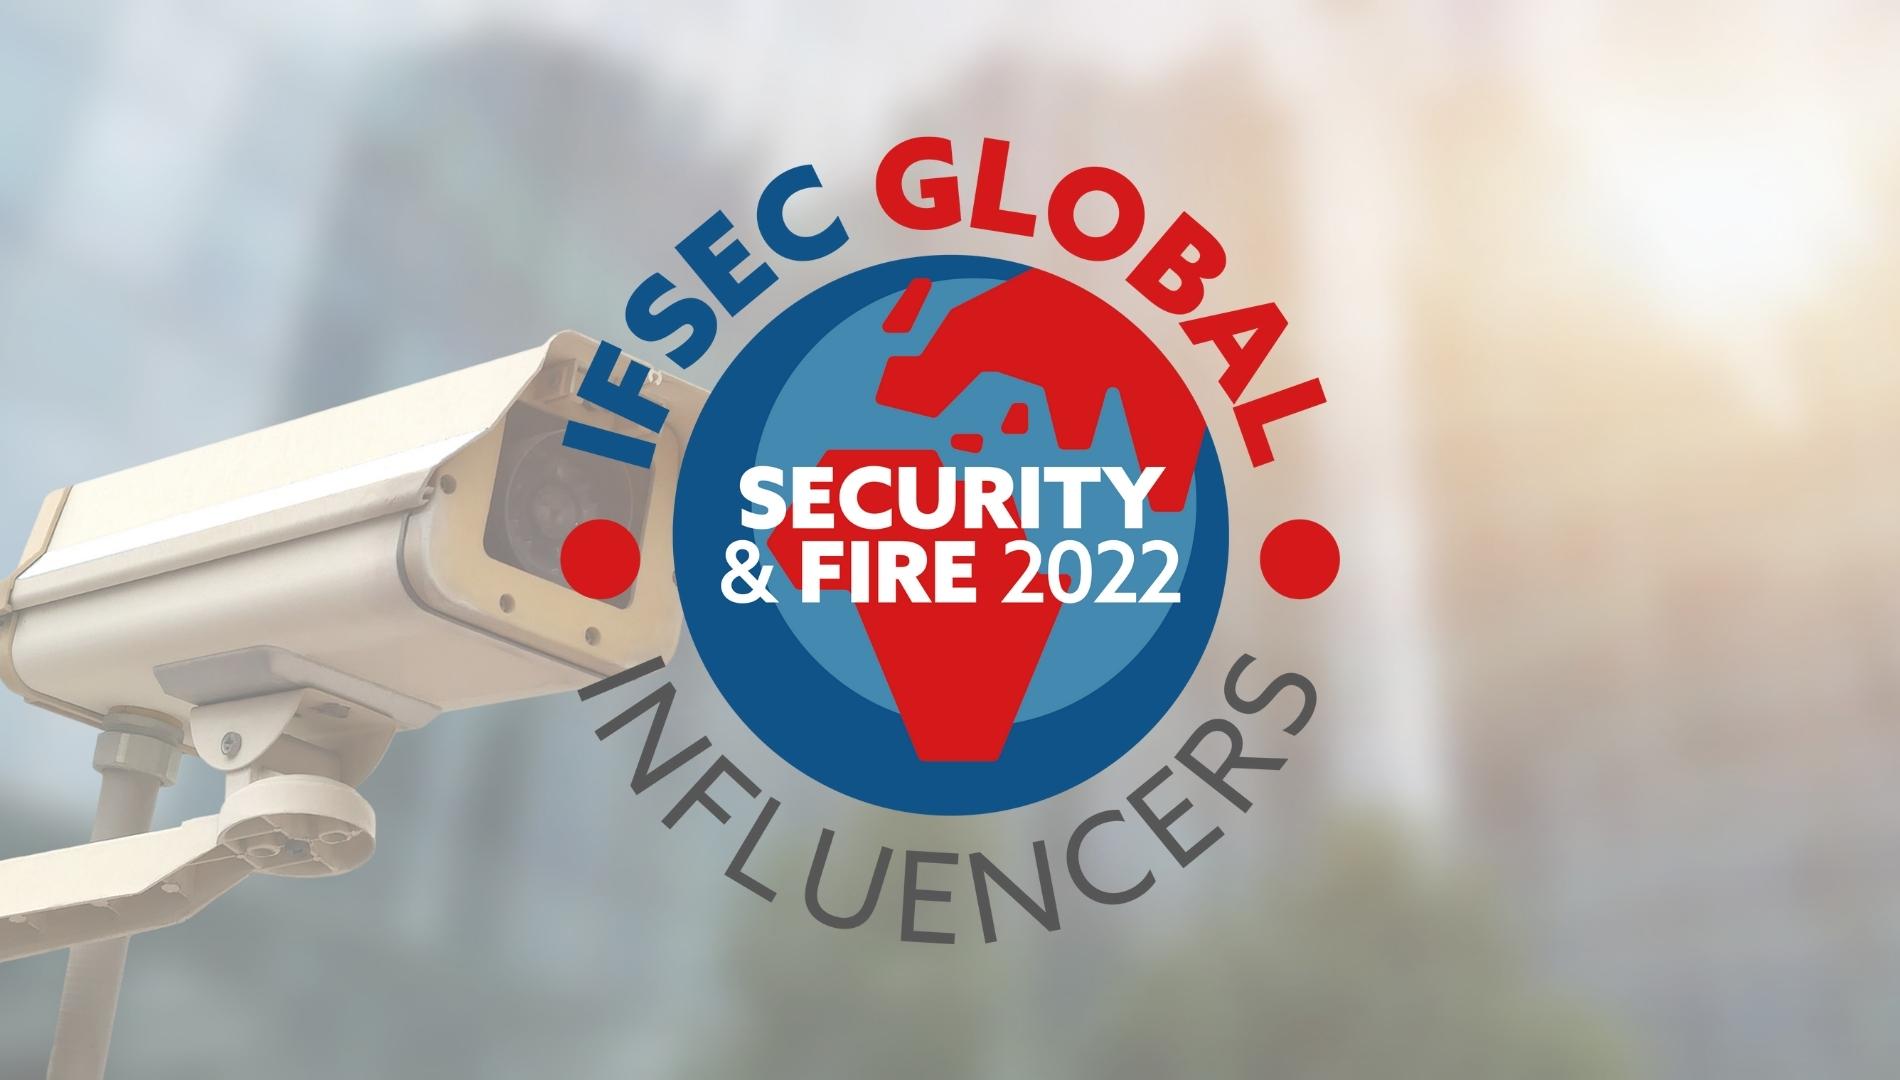 Revealed: The IFSEC Global influencers in Security 2022